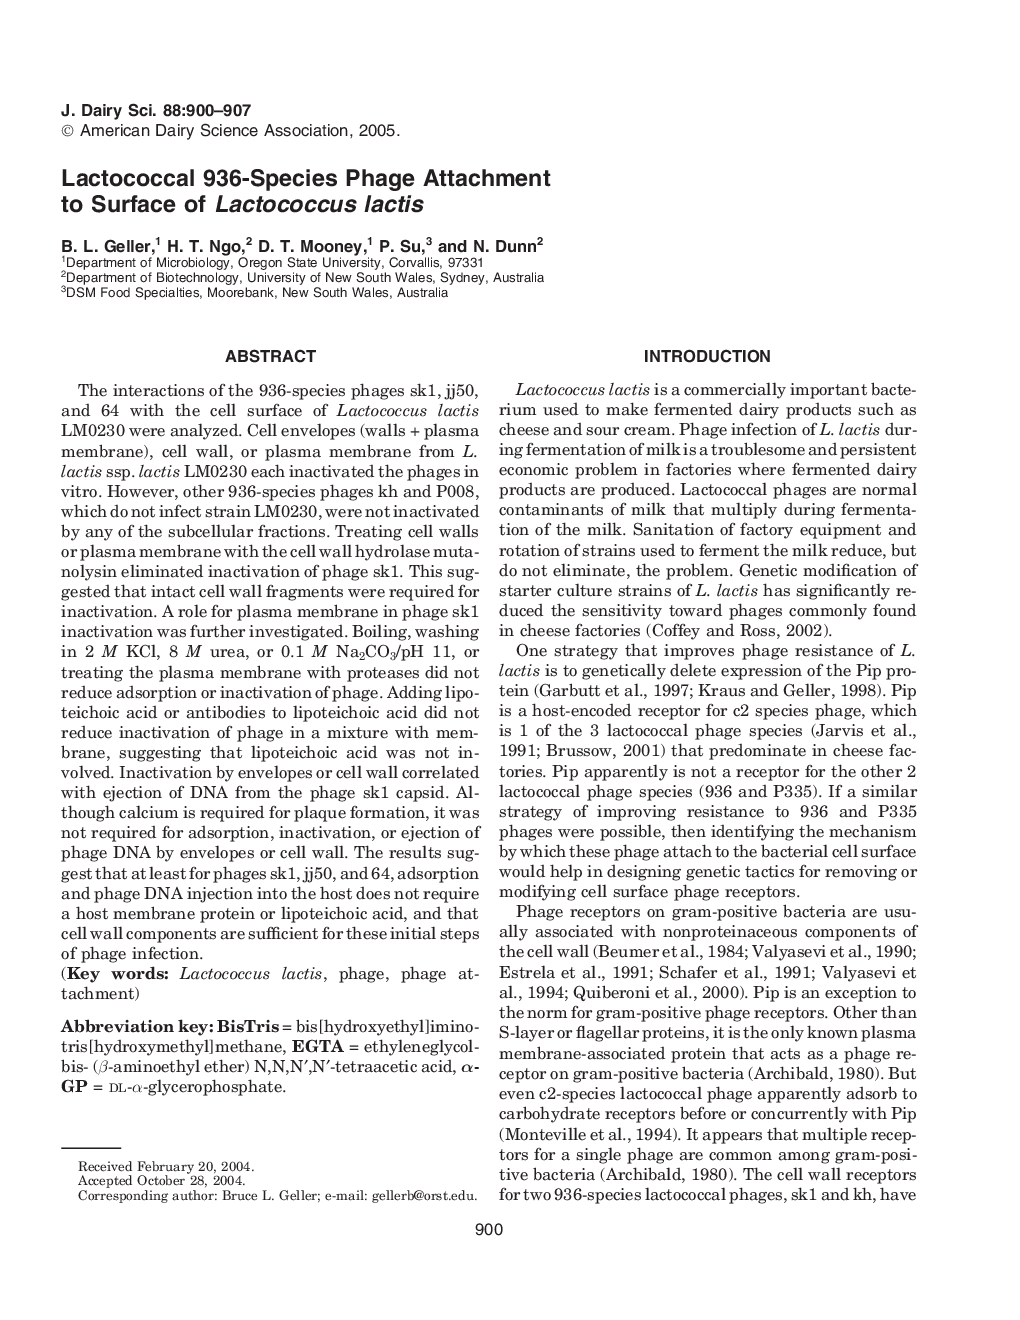 Lactococcal 936-Species Phage Attachment to Surface of Lactococcus lactis